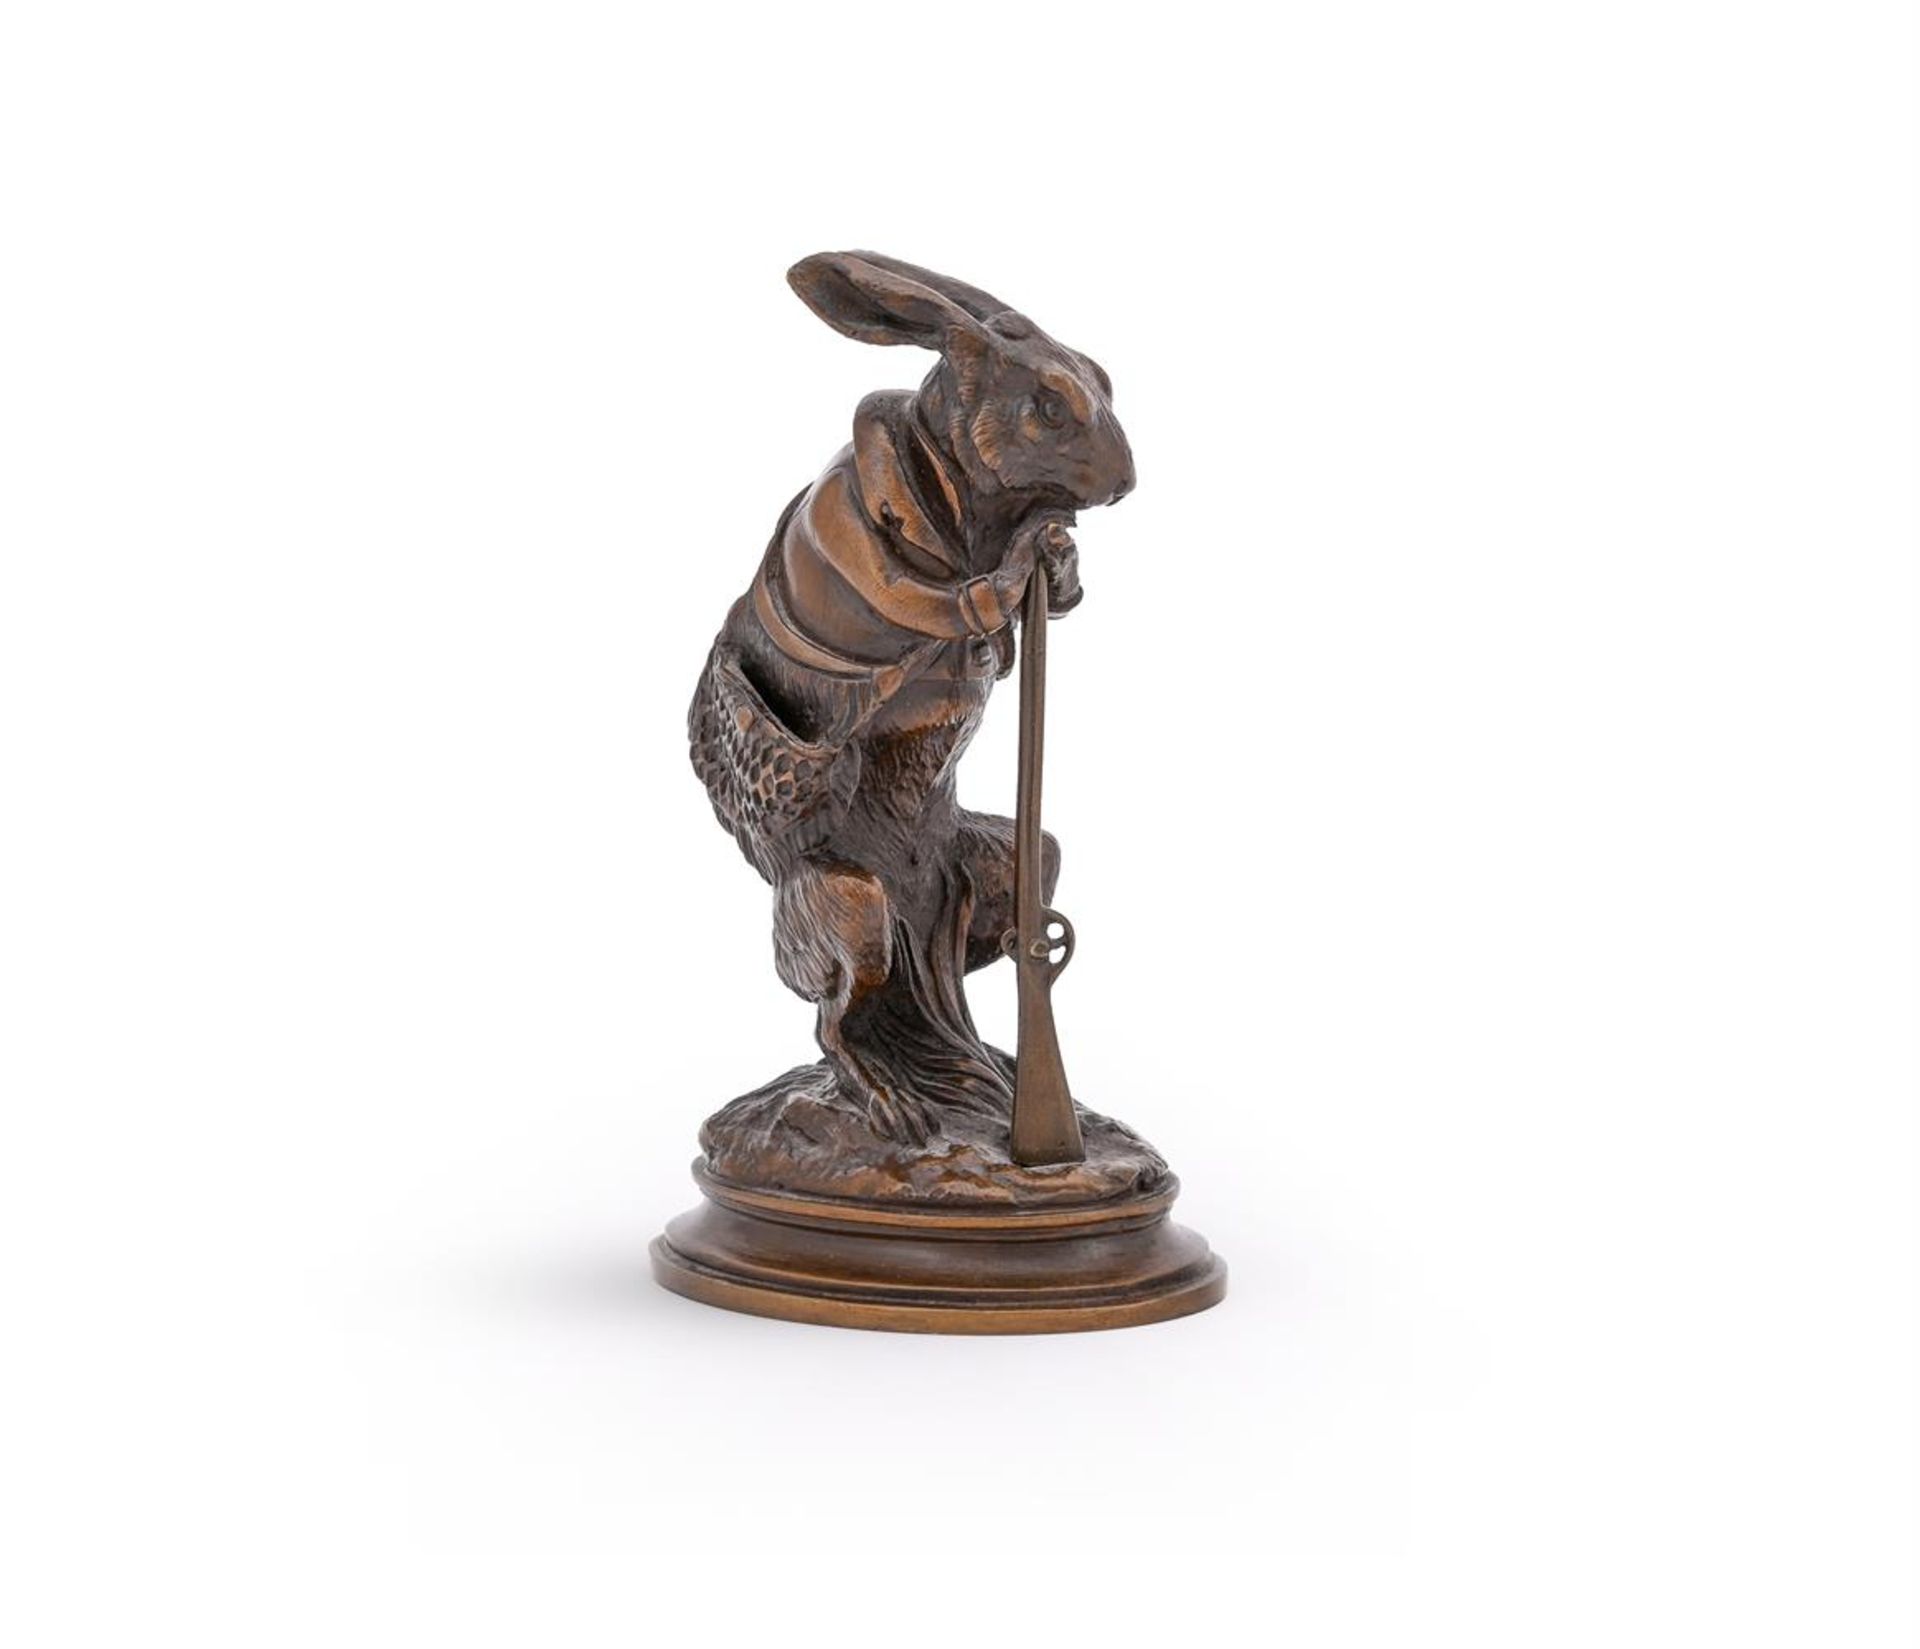 ALPHONSE-ALEXANDRE ARSON (FRENCH, 1822-1895), A BRONZE MODEL OF A HARE DRESSED AS A HUNTER - Image 2 of 5